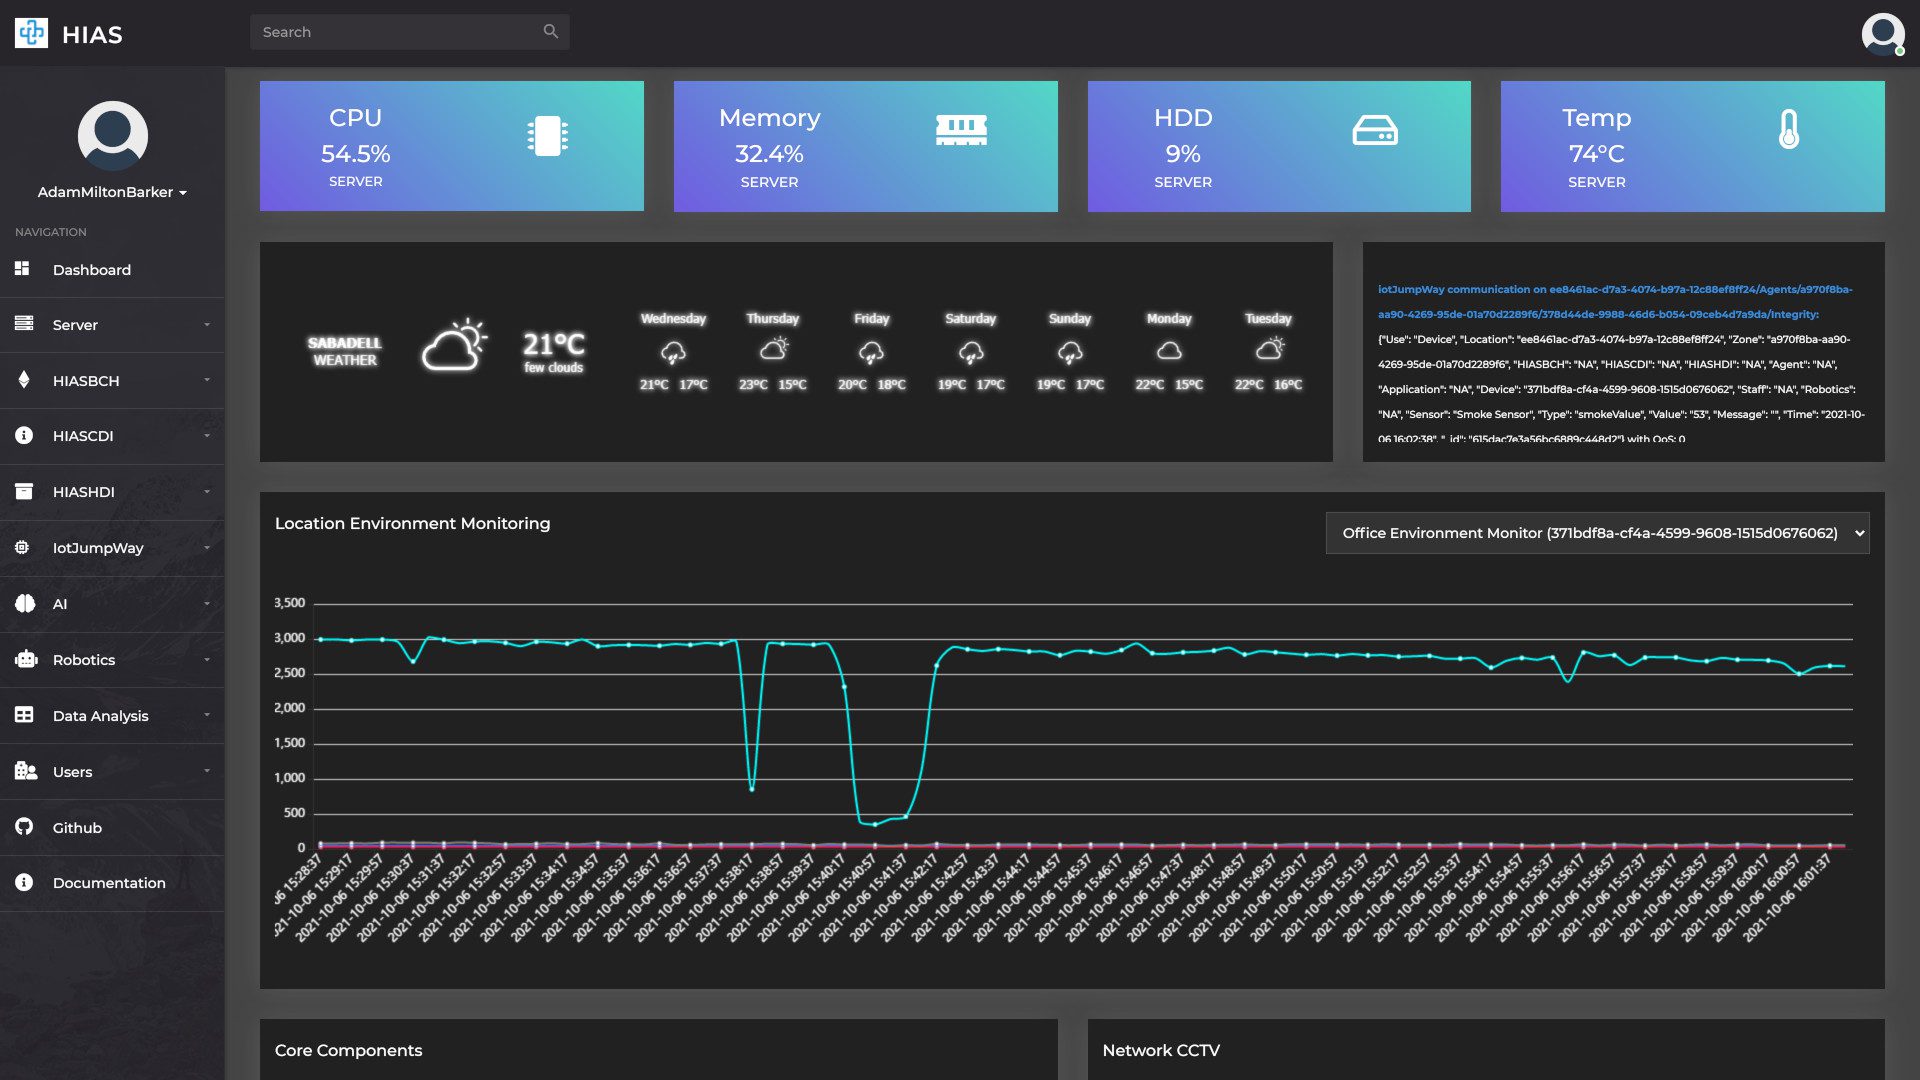 Figure 1 . Monitoring server vitals and environmental data in the UI